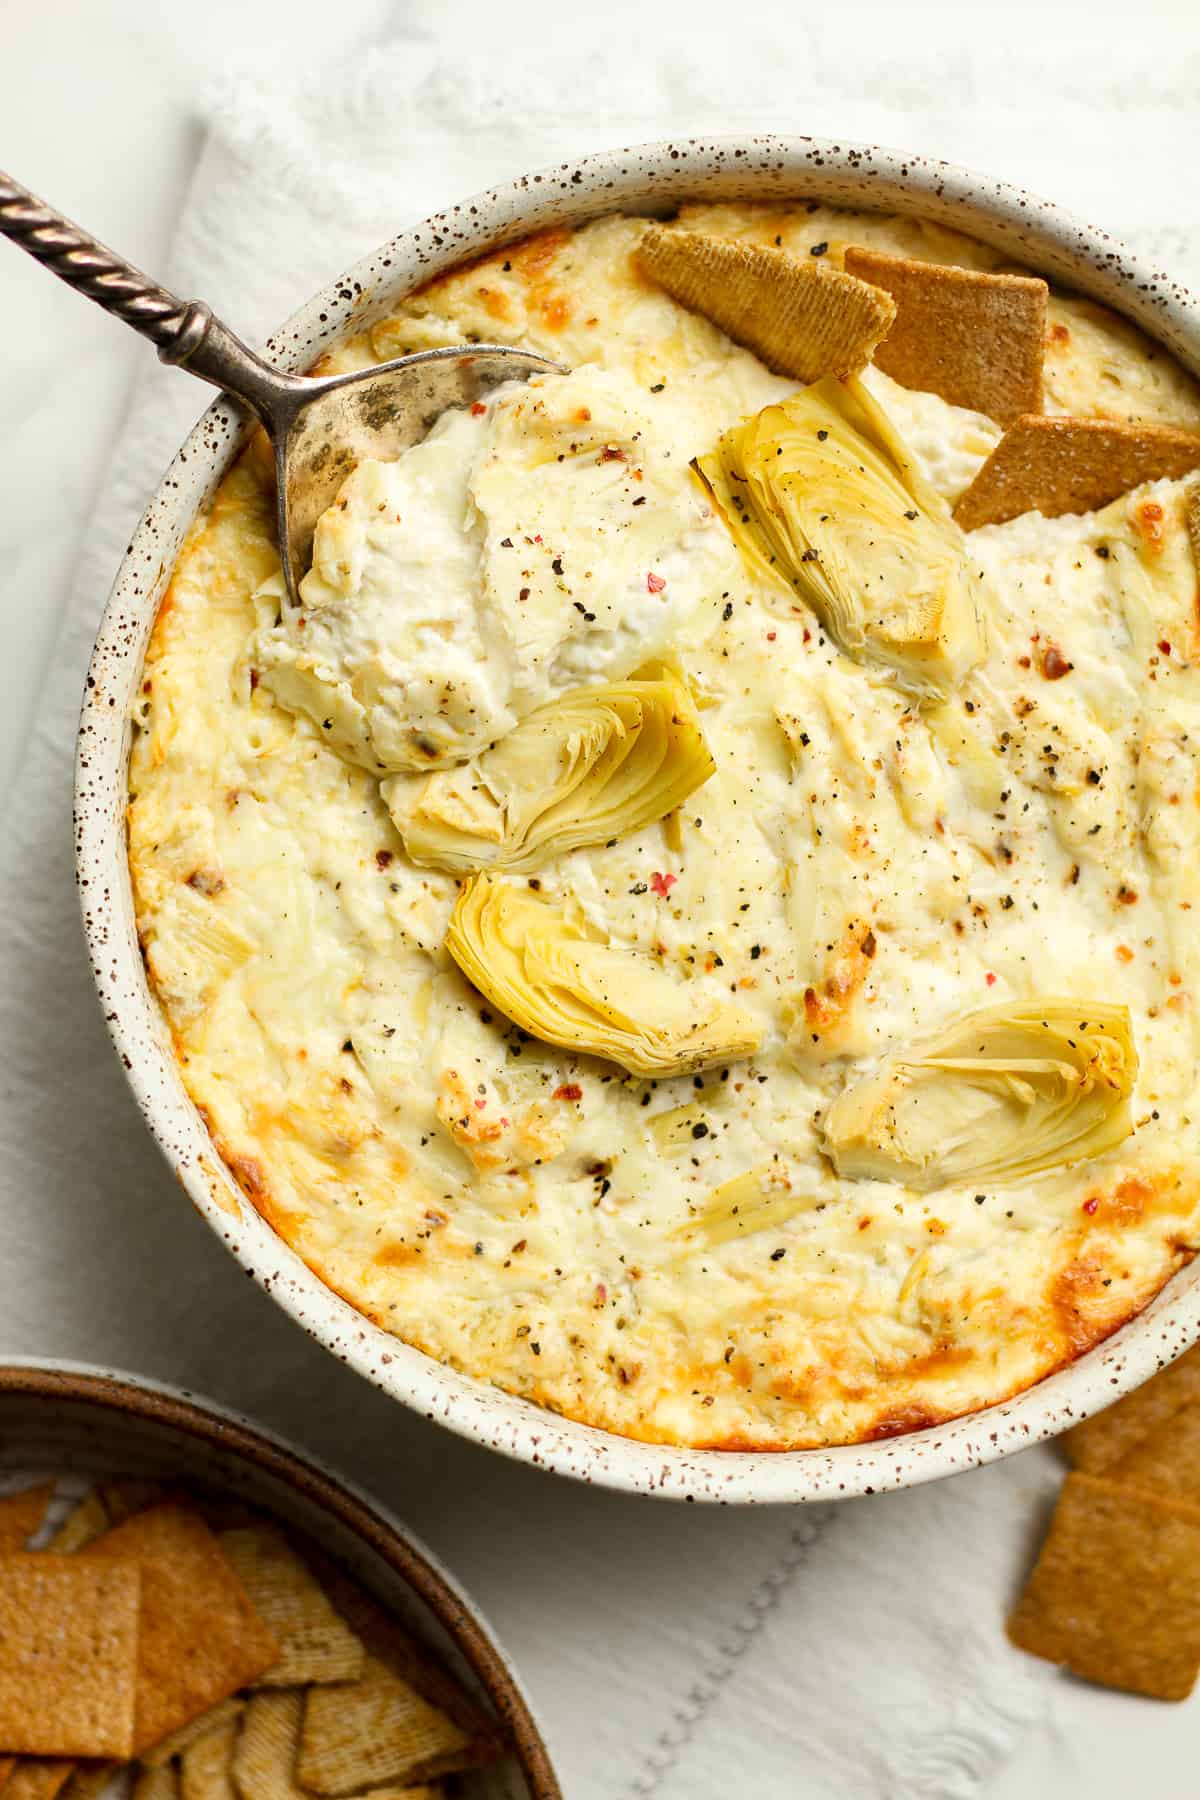 Closeup of the artichoke dip with a spoon.